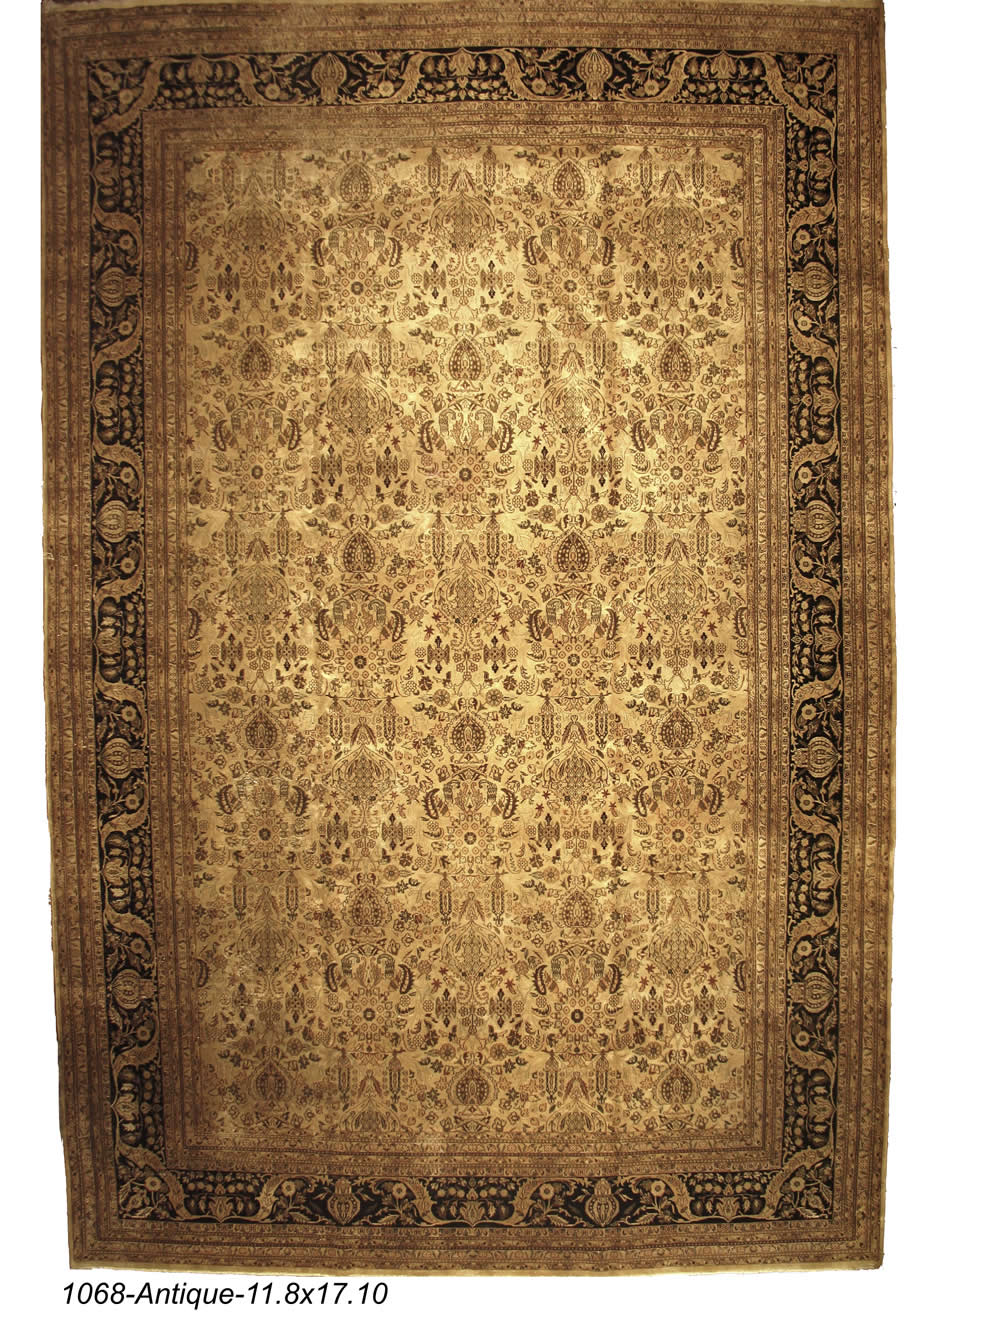 Antique Agra Rug - Woven Passion Rugs